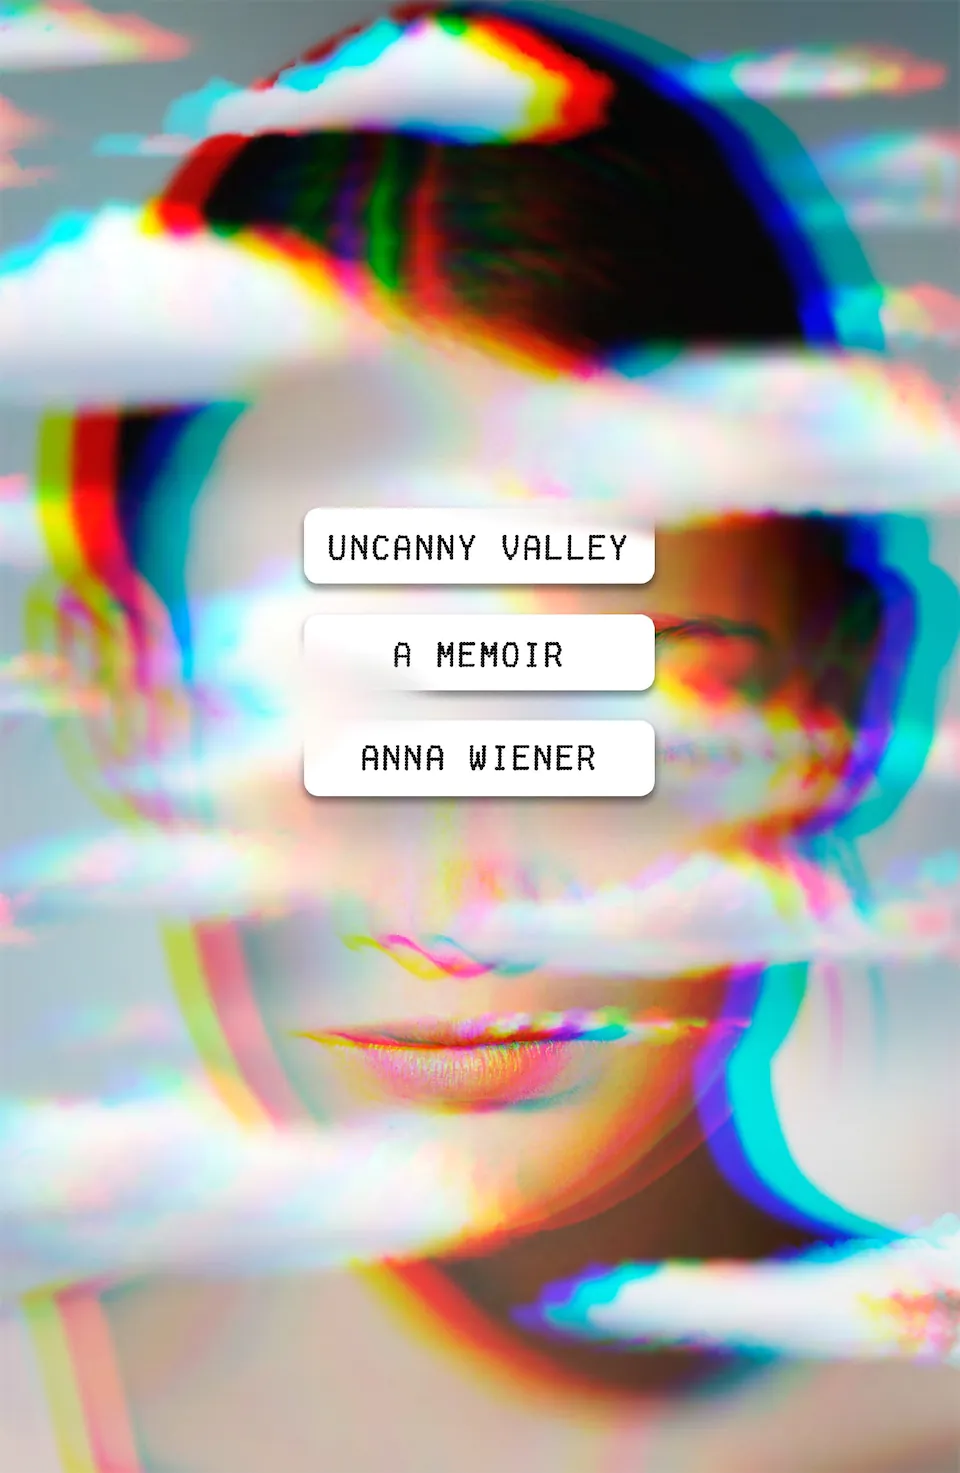 Uncanny Valley. A Memoir by Anna Wiener finished on 2022 Oct 14